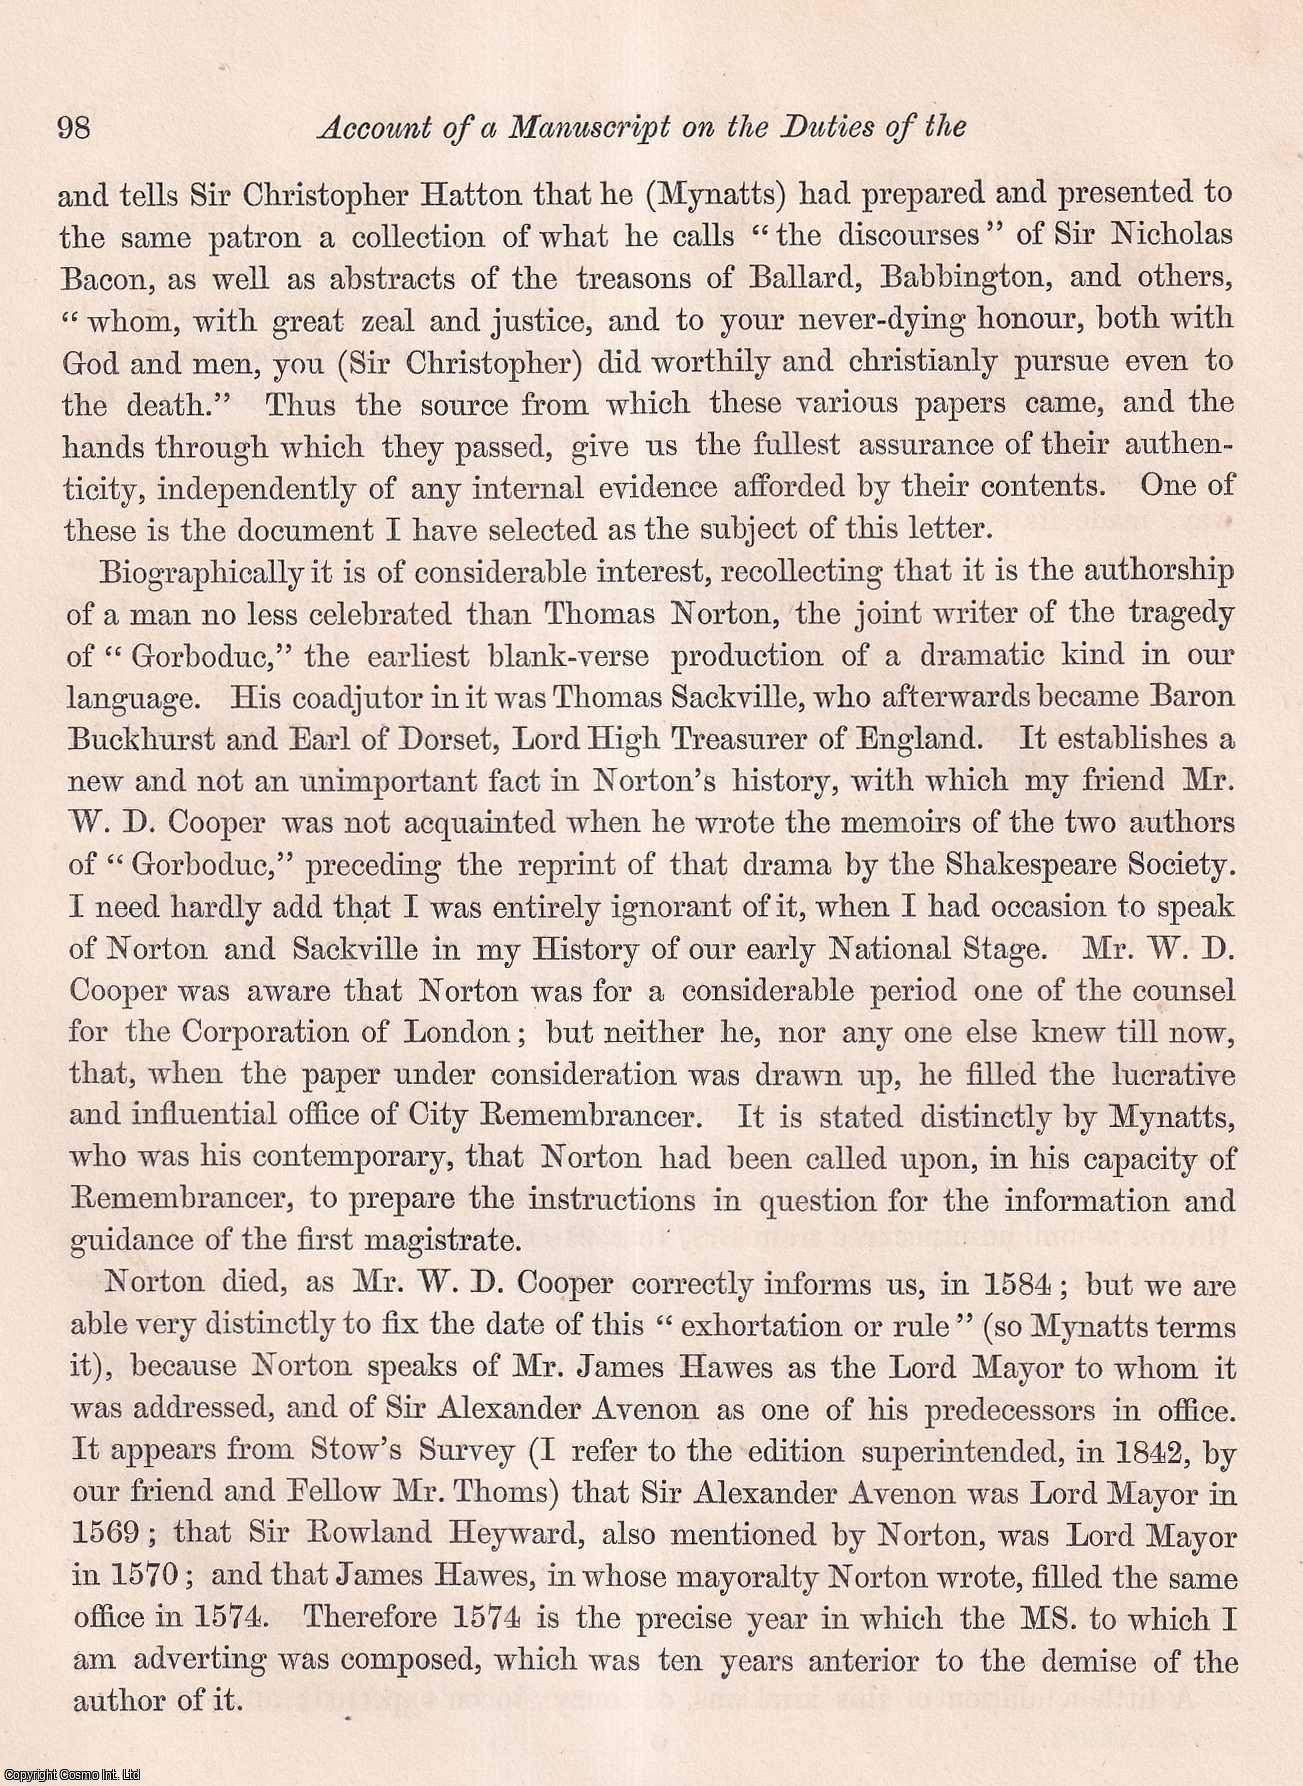 J. Payne Collier, Esq. - Account of a Manuscript, by Thomas Norton, Member of Parliament for, and Remembrancer to, the City of London, relating to the ancient Duties of the Lord Mayor and Corporation. An uncommon original article from the journal Archaeologia, 1855.